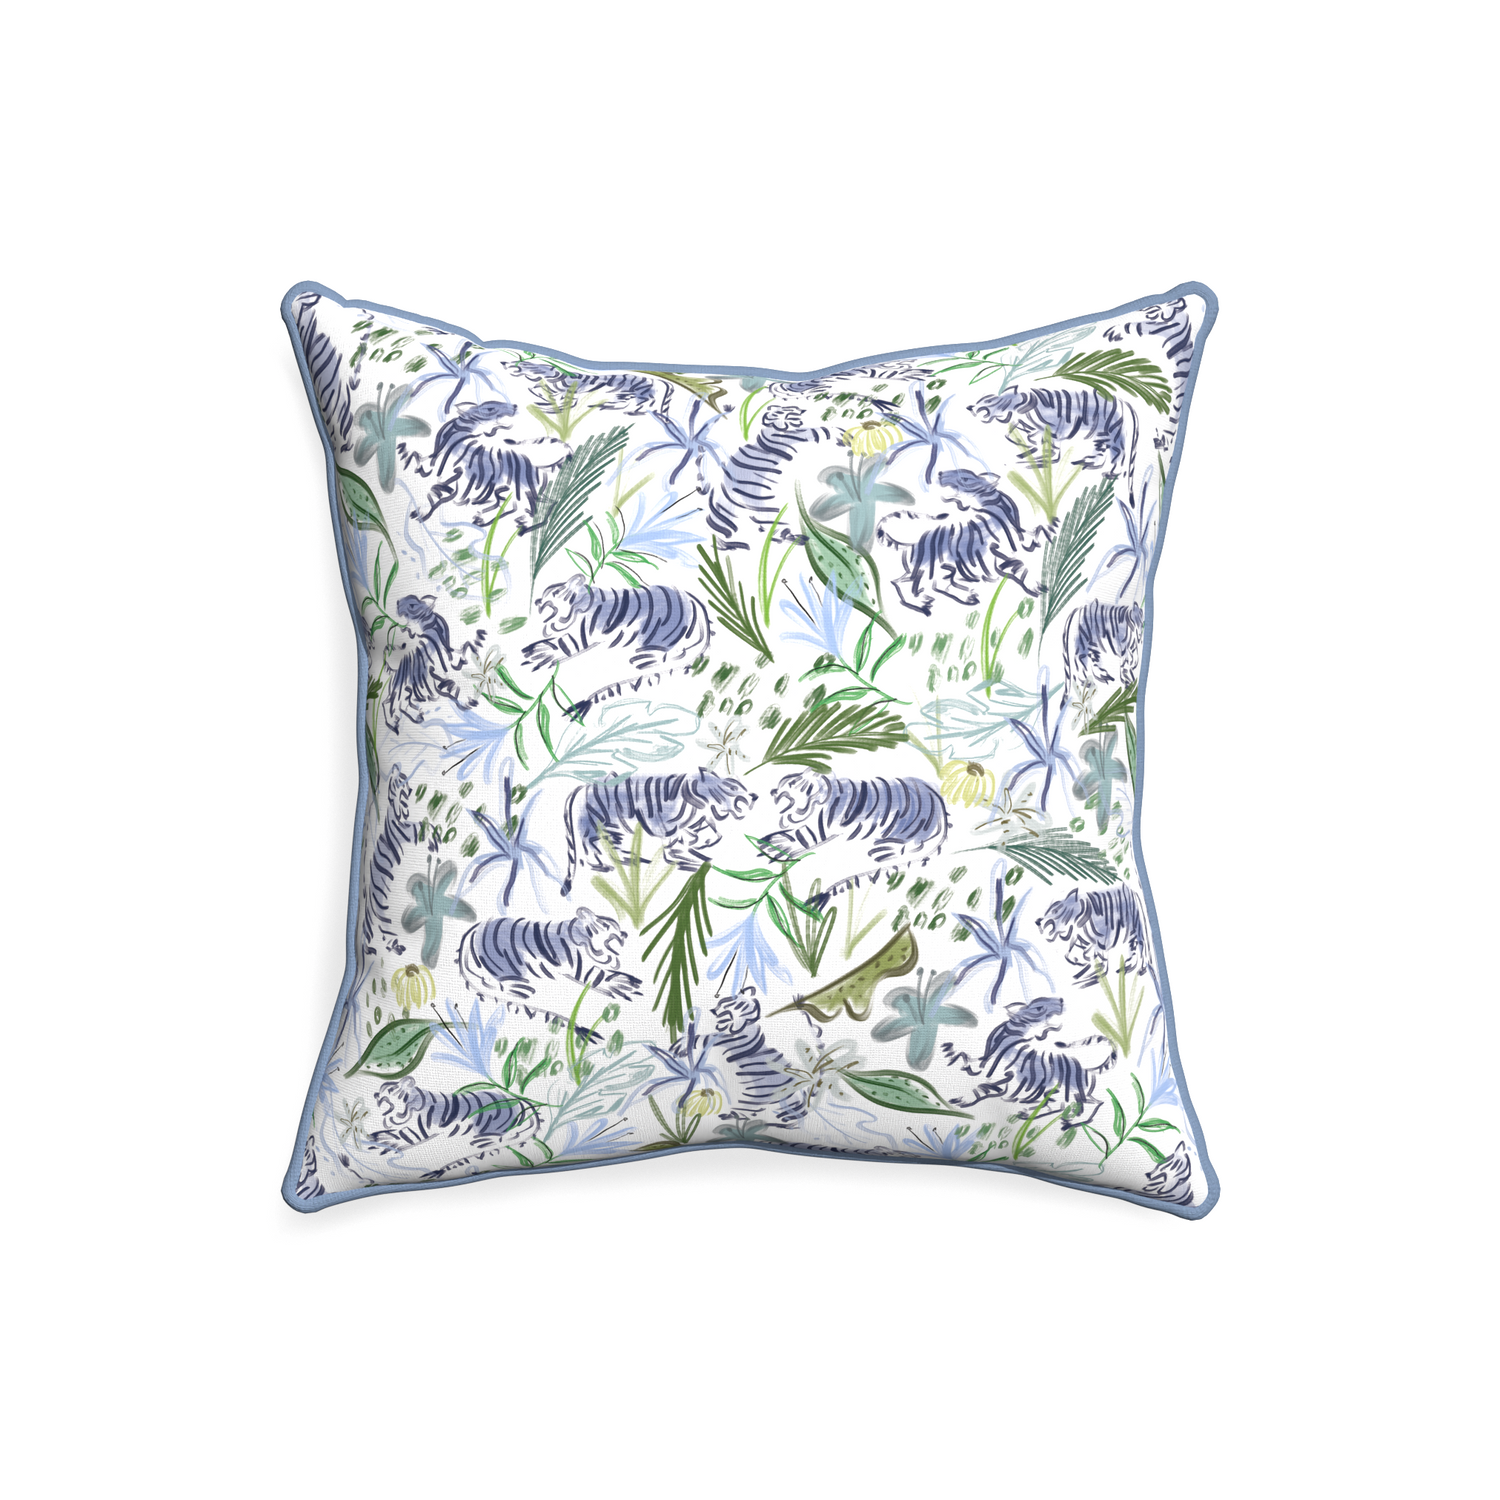 20-square frida green custom pillow with sky piping on white background